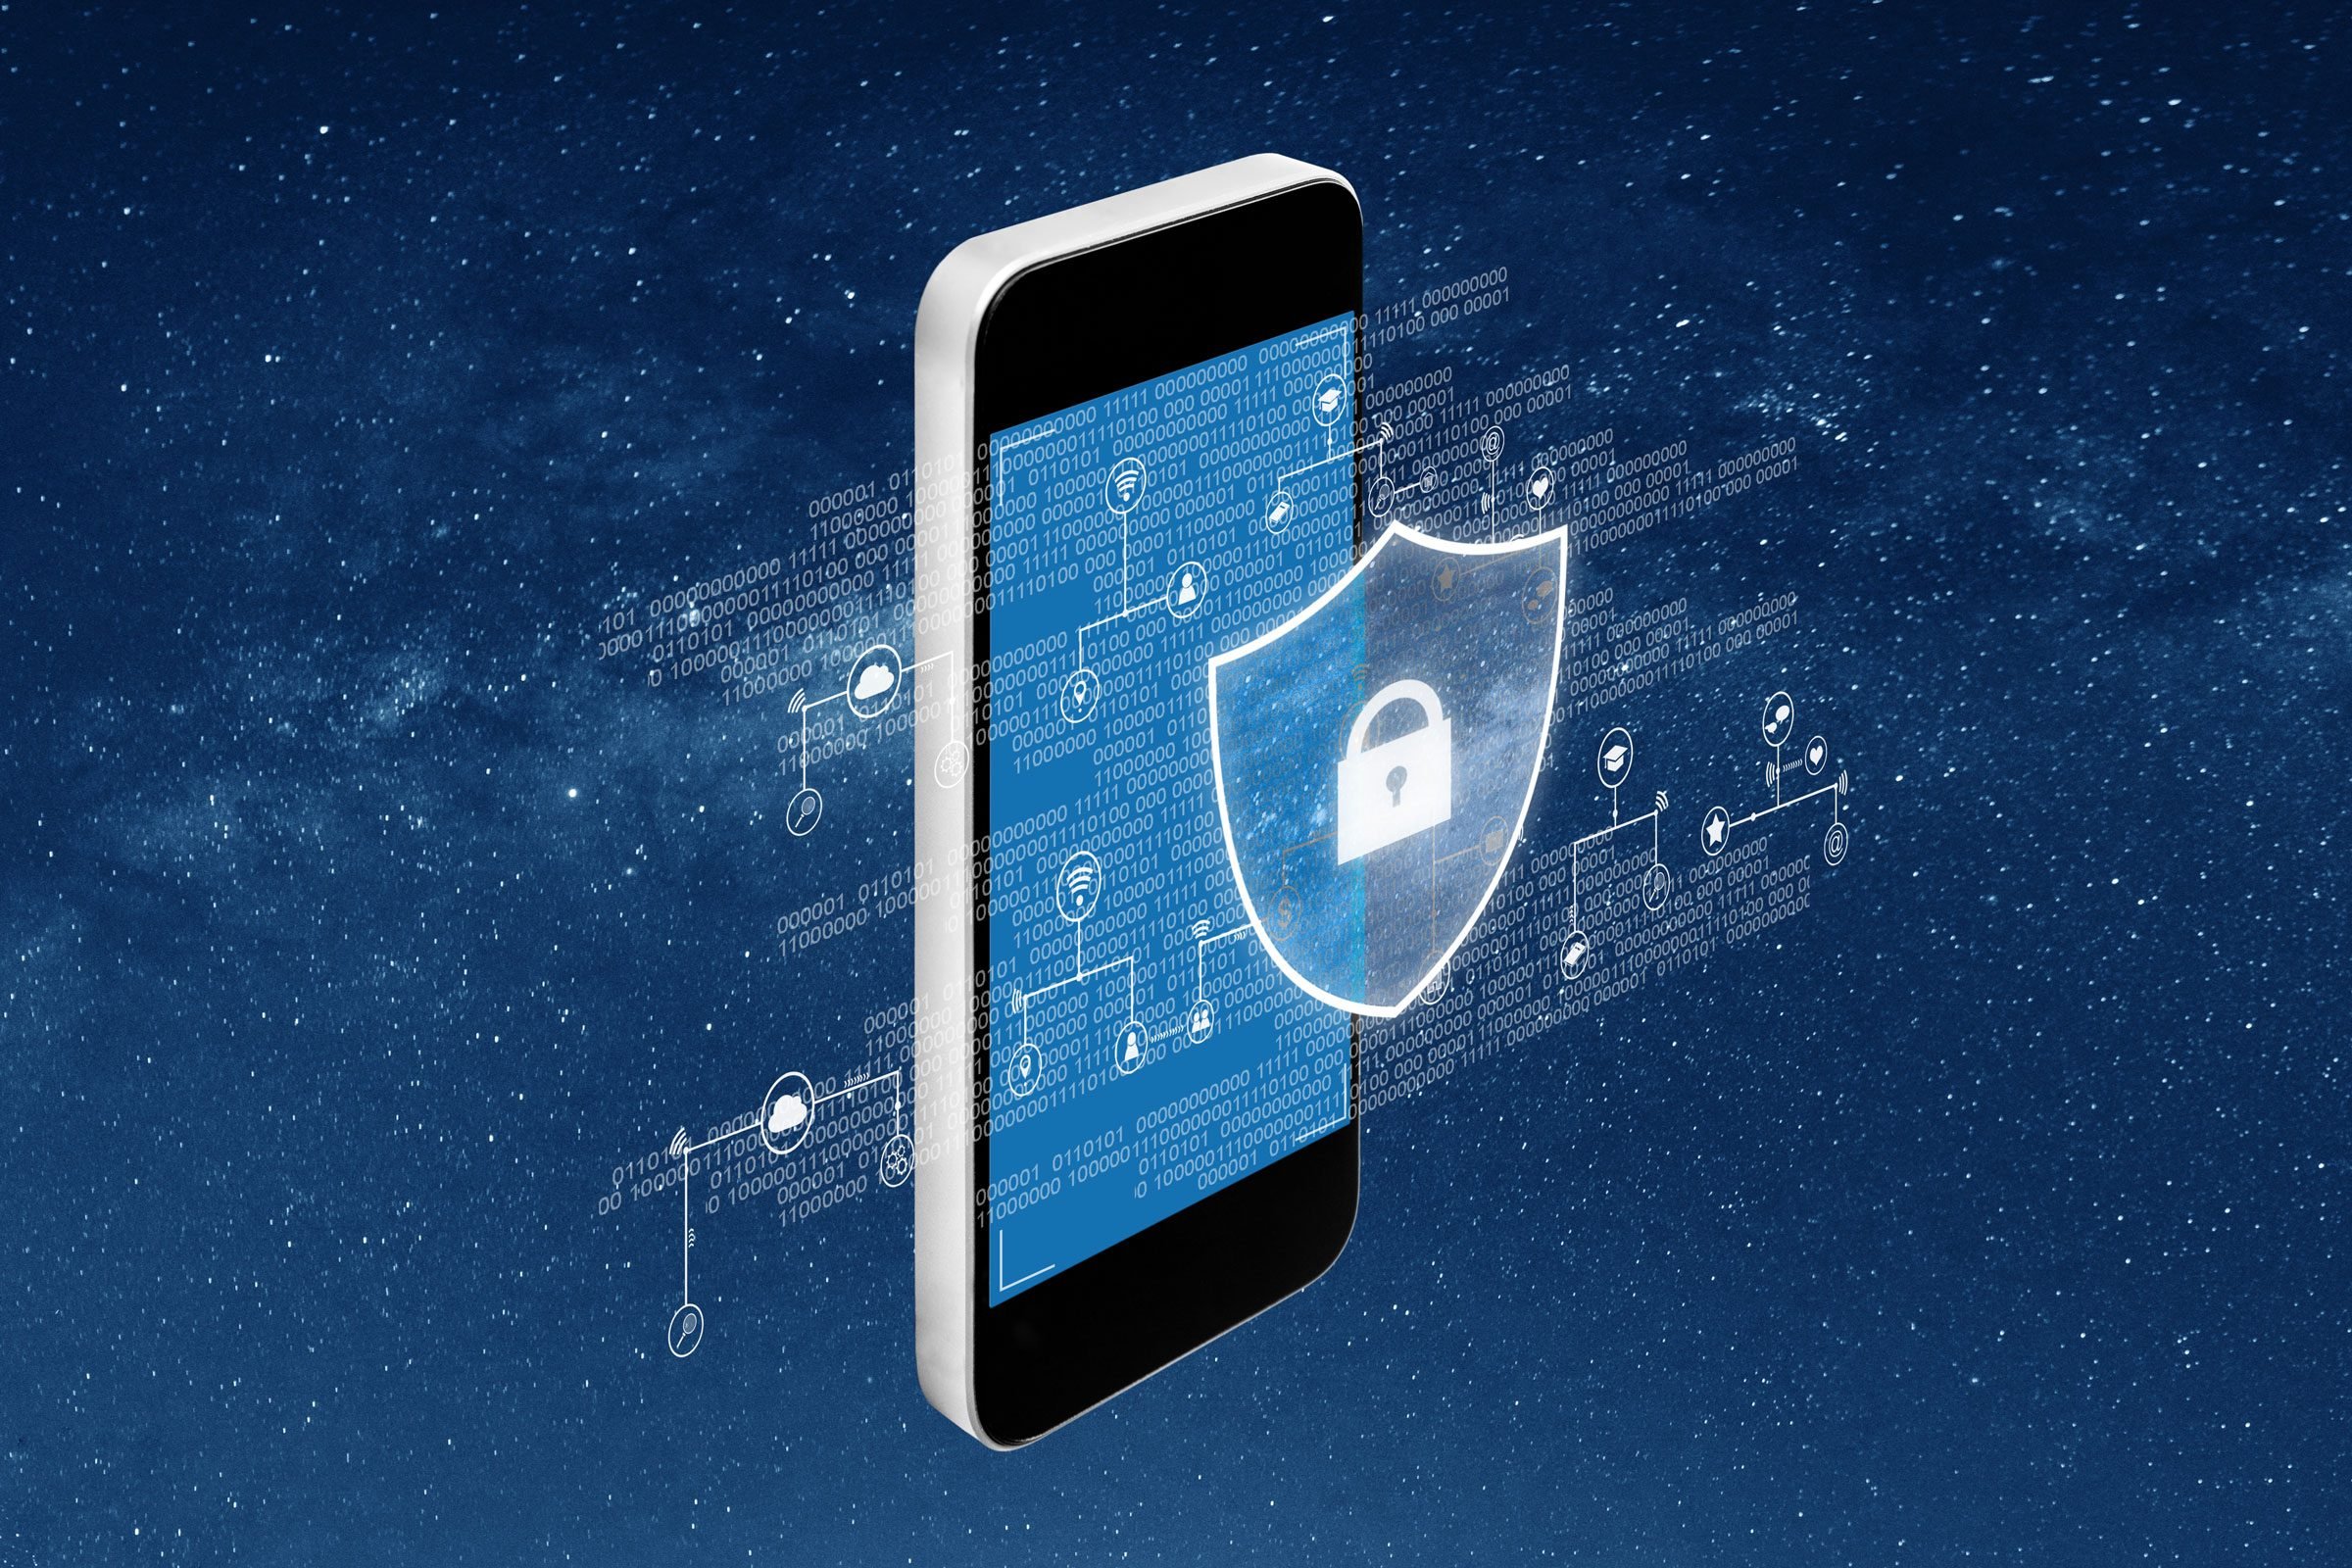 How to Protect Your Phone from Tracking: 7 Easy Tips